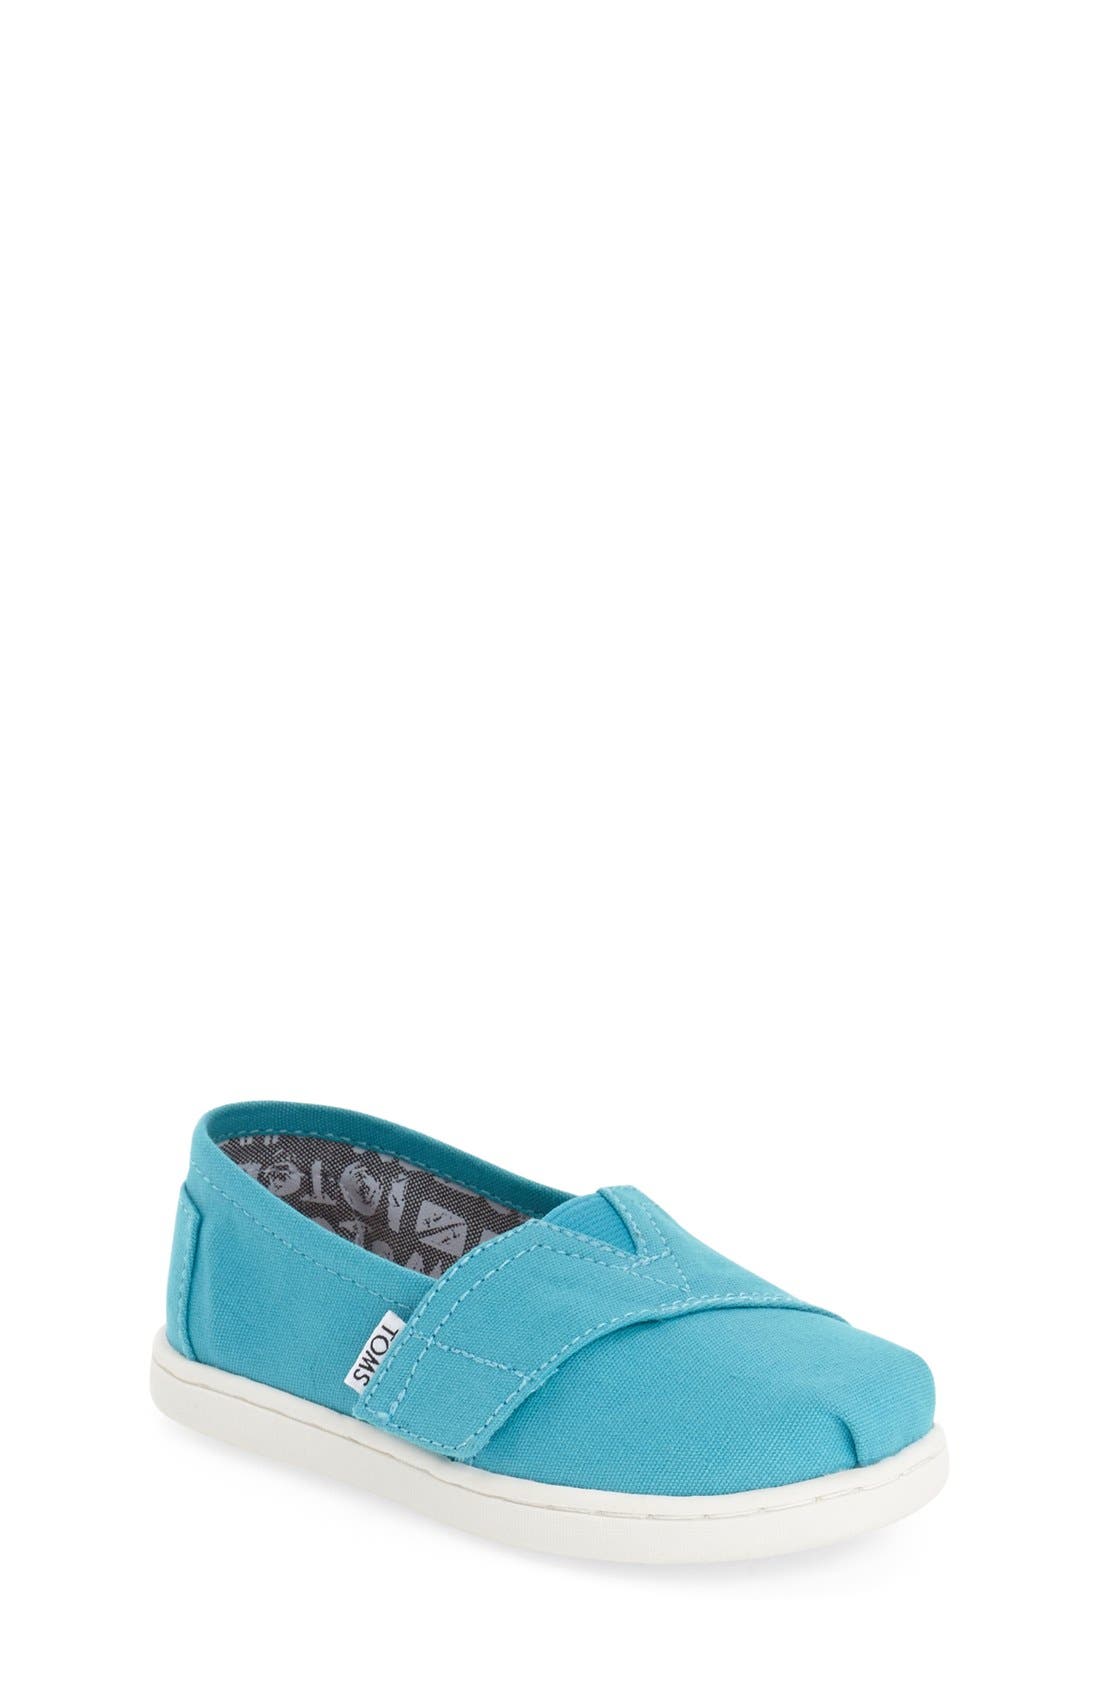 baby blue toms